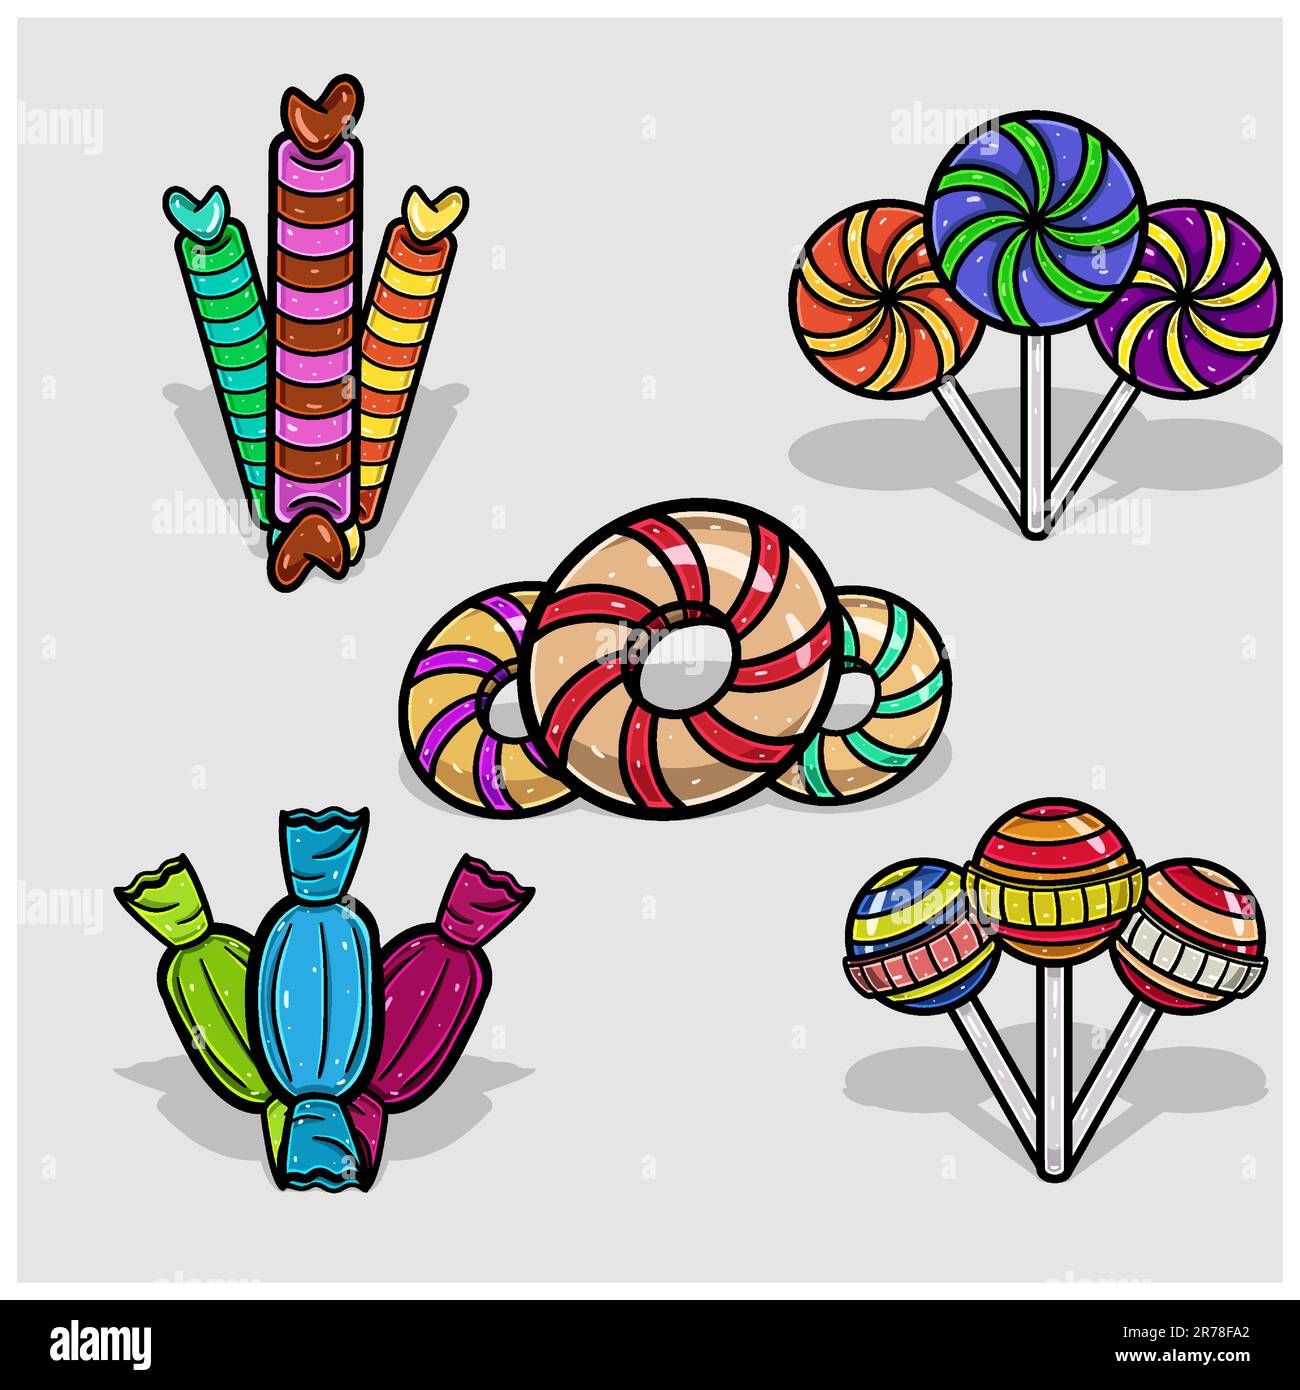 Candy's Cartoon With Colorful. Simple Effect. Vector and Illustration. Stock Vector